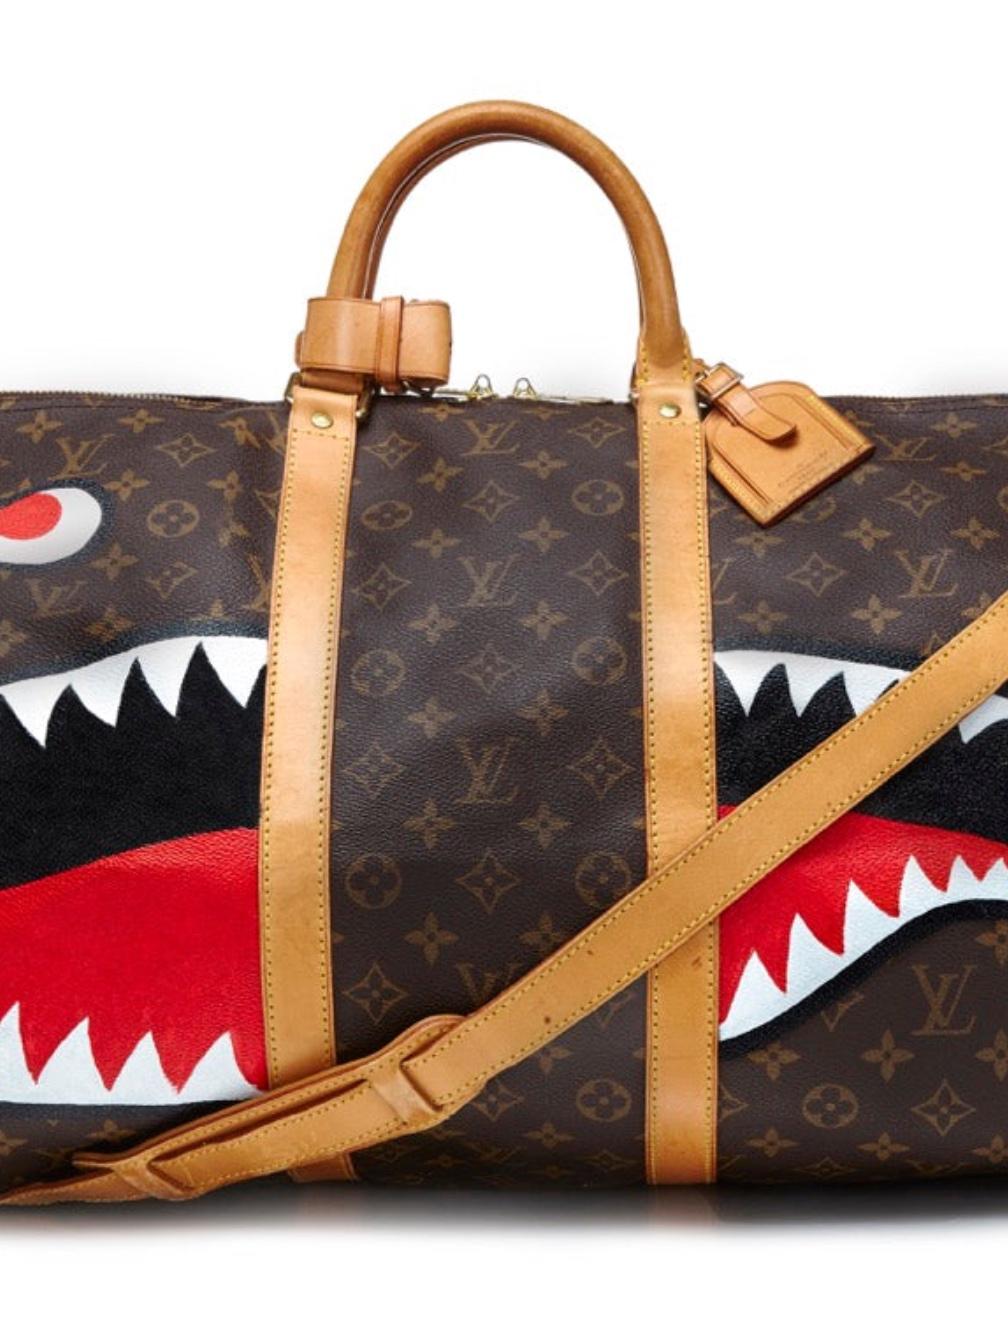 Add some bite to your look with this hand-painted Louis Vuitton Shark Keepall travel bag from Rewind's Emotional Baggage collection, where iconic handbags are specially customised with hand-painted illustrations. In Monogram Canvas leather, the